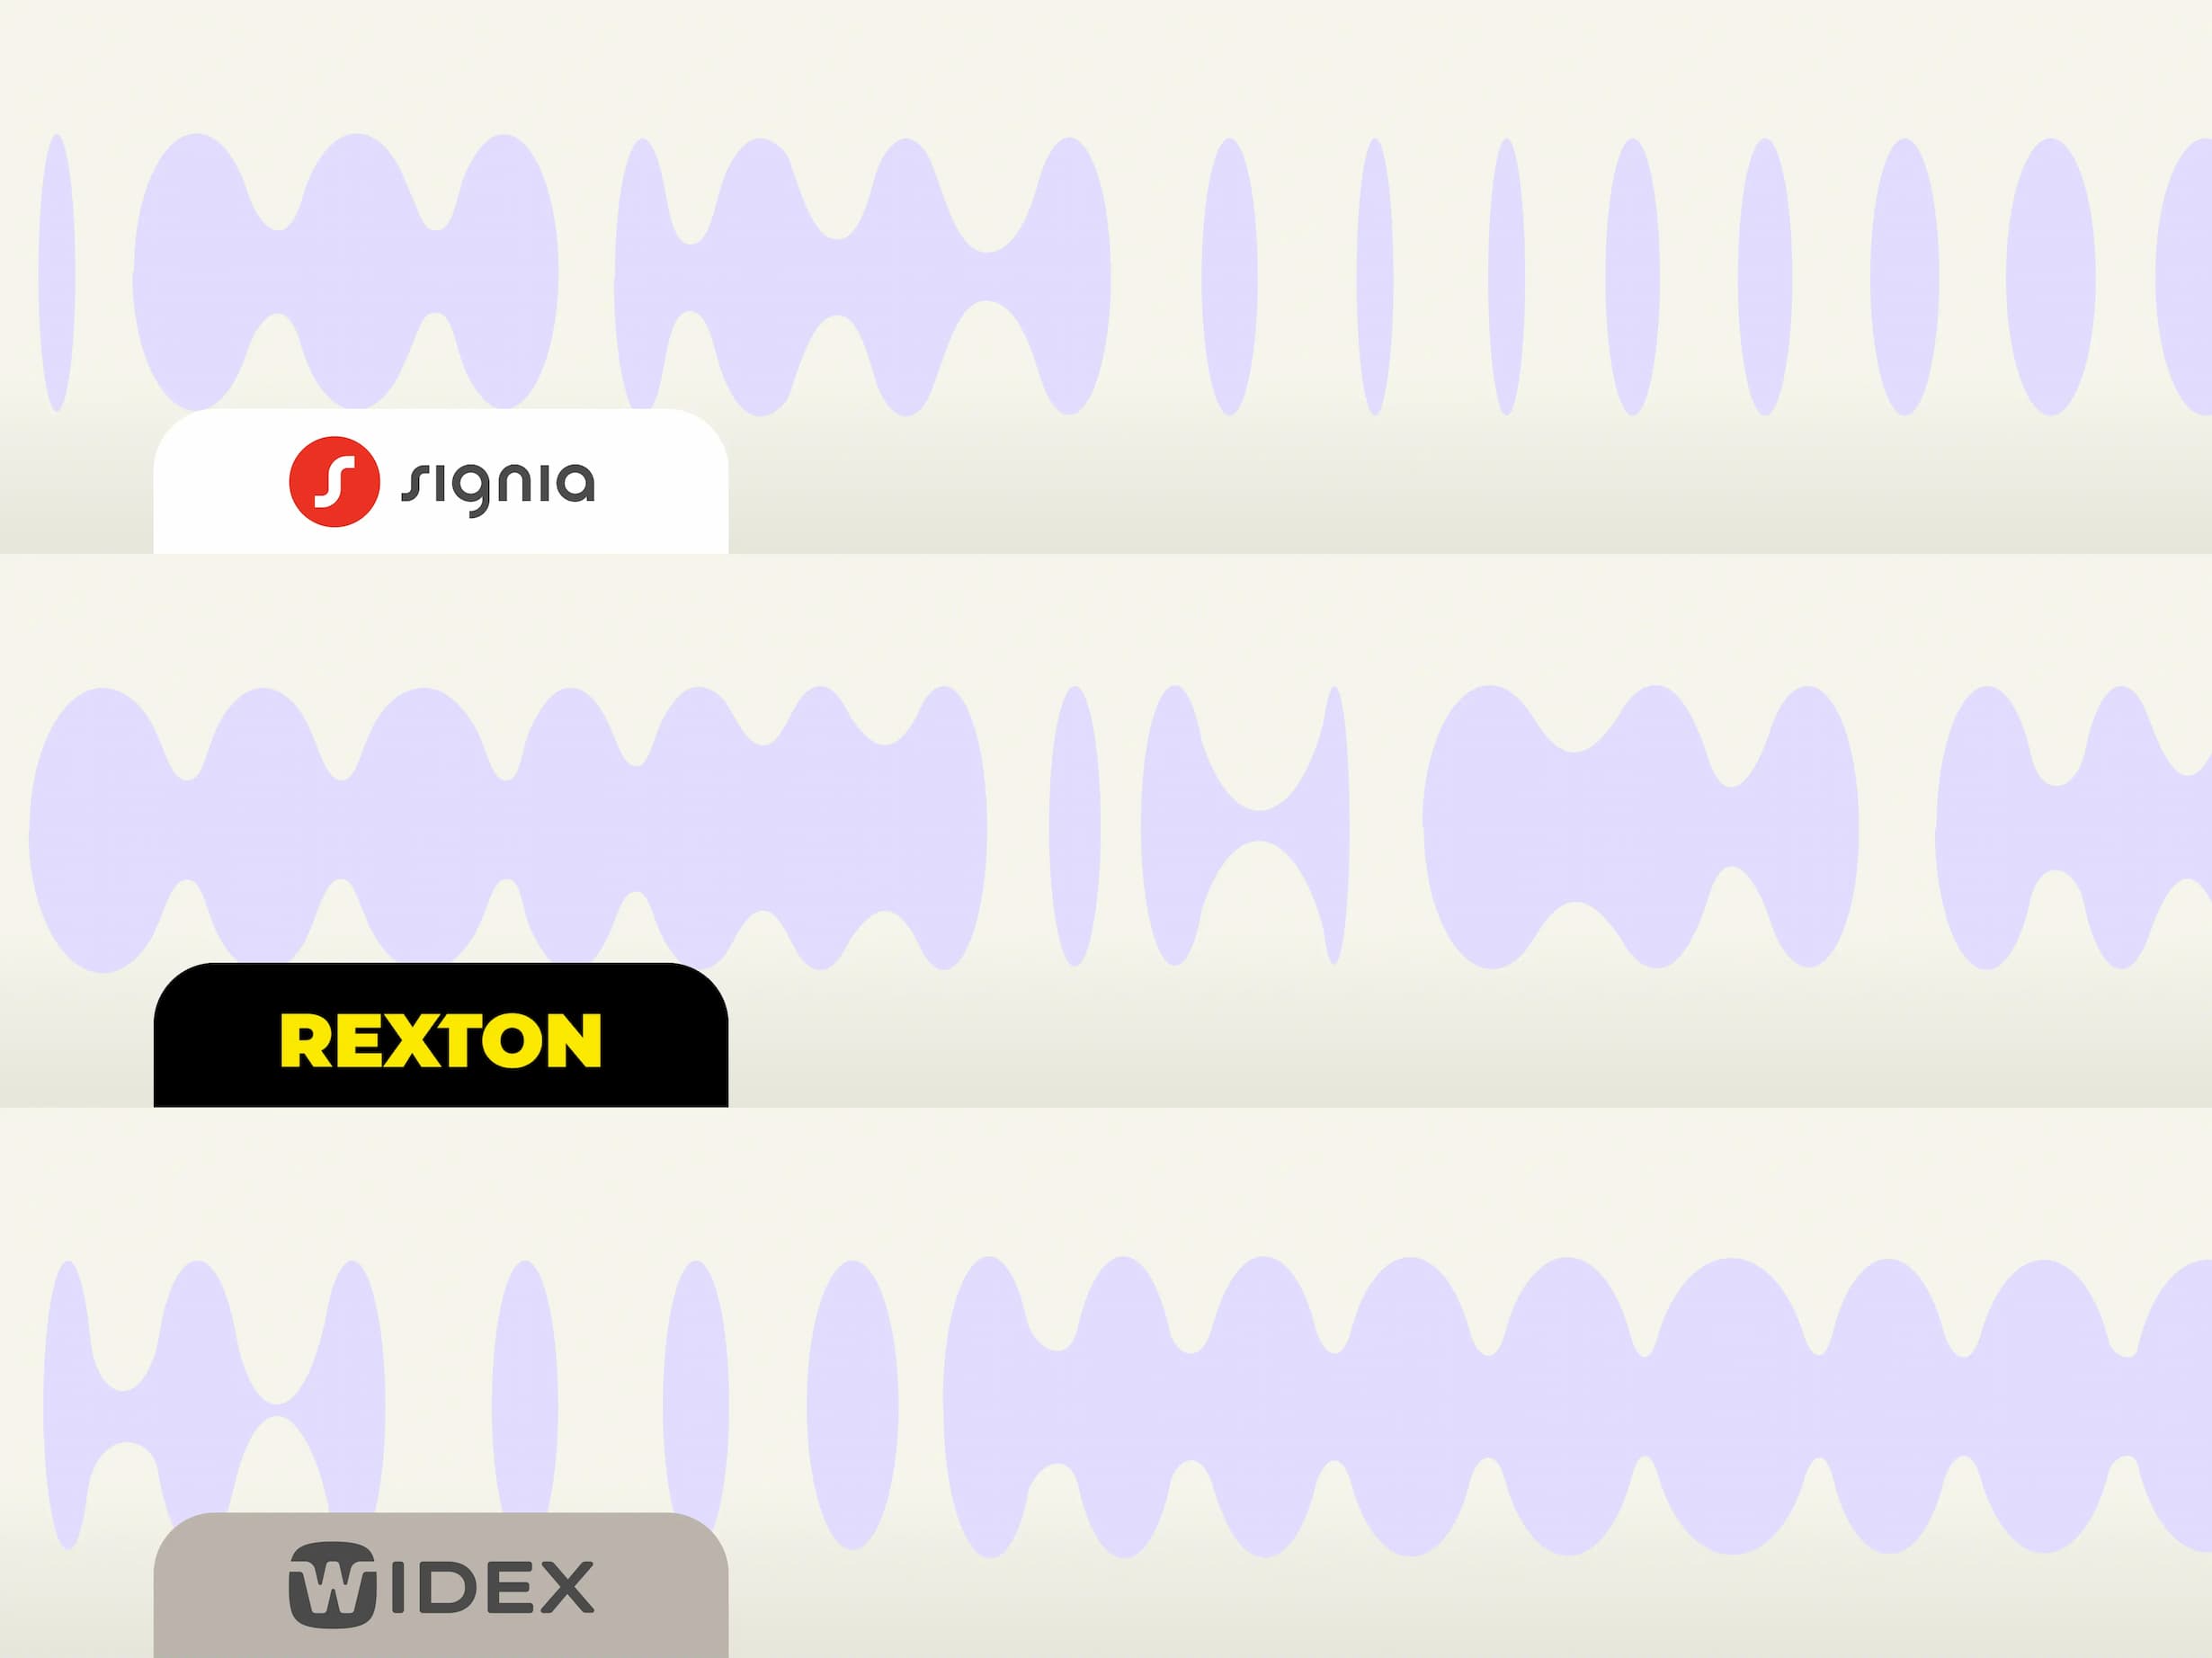 Hearing aid brands - Signia, Widex and Rexton